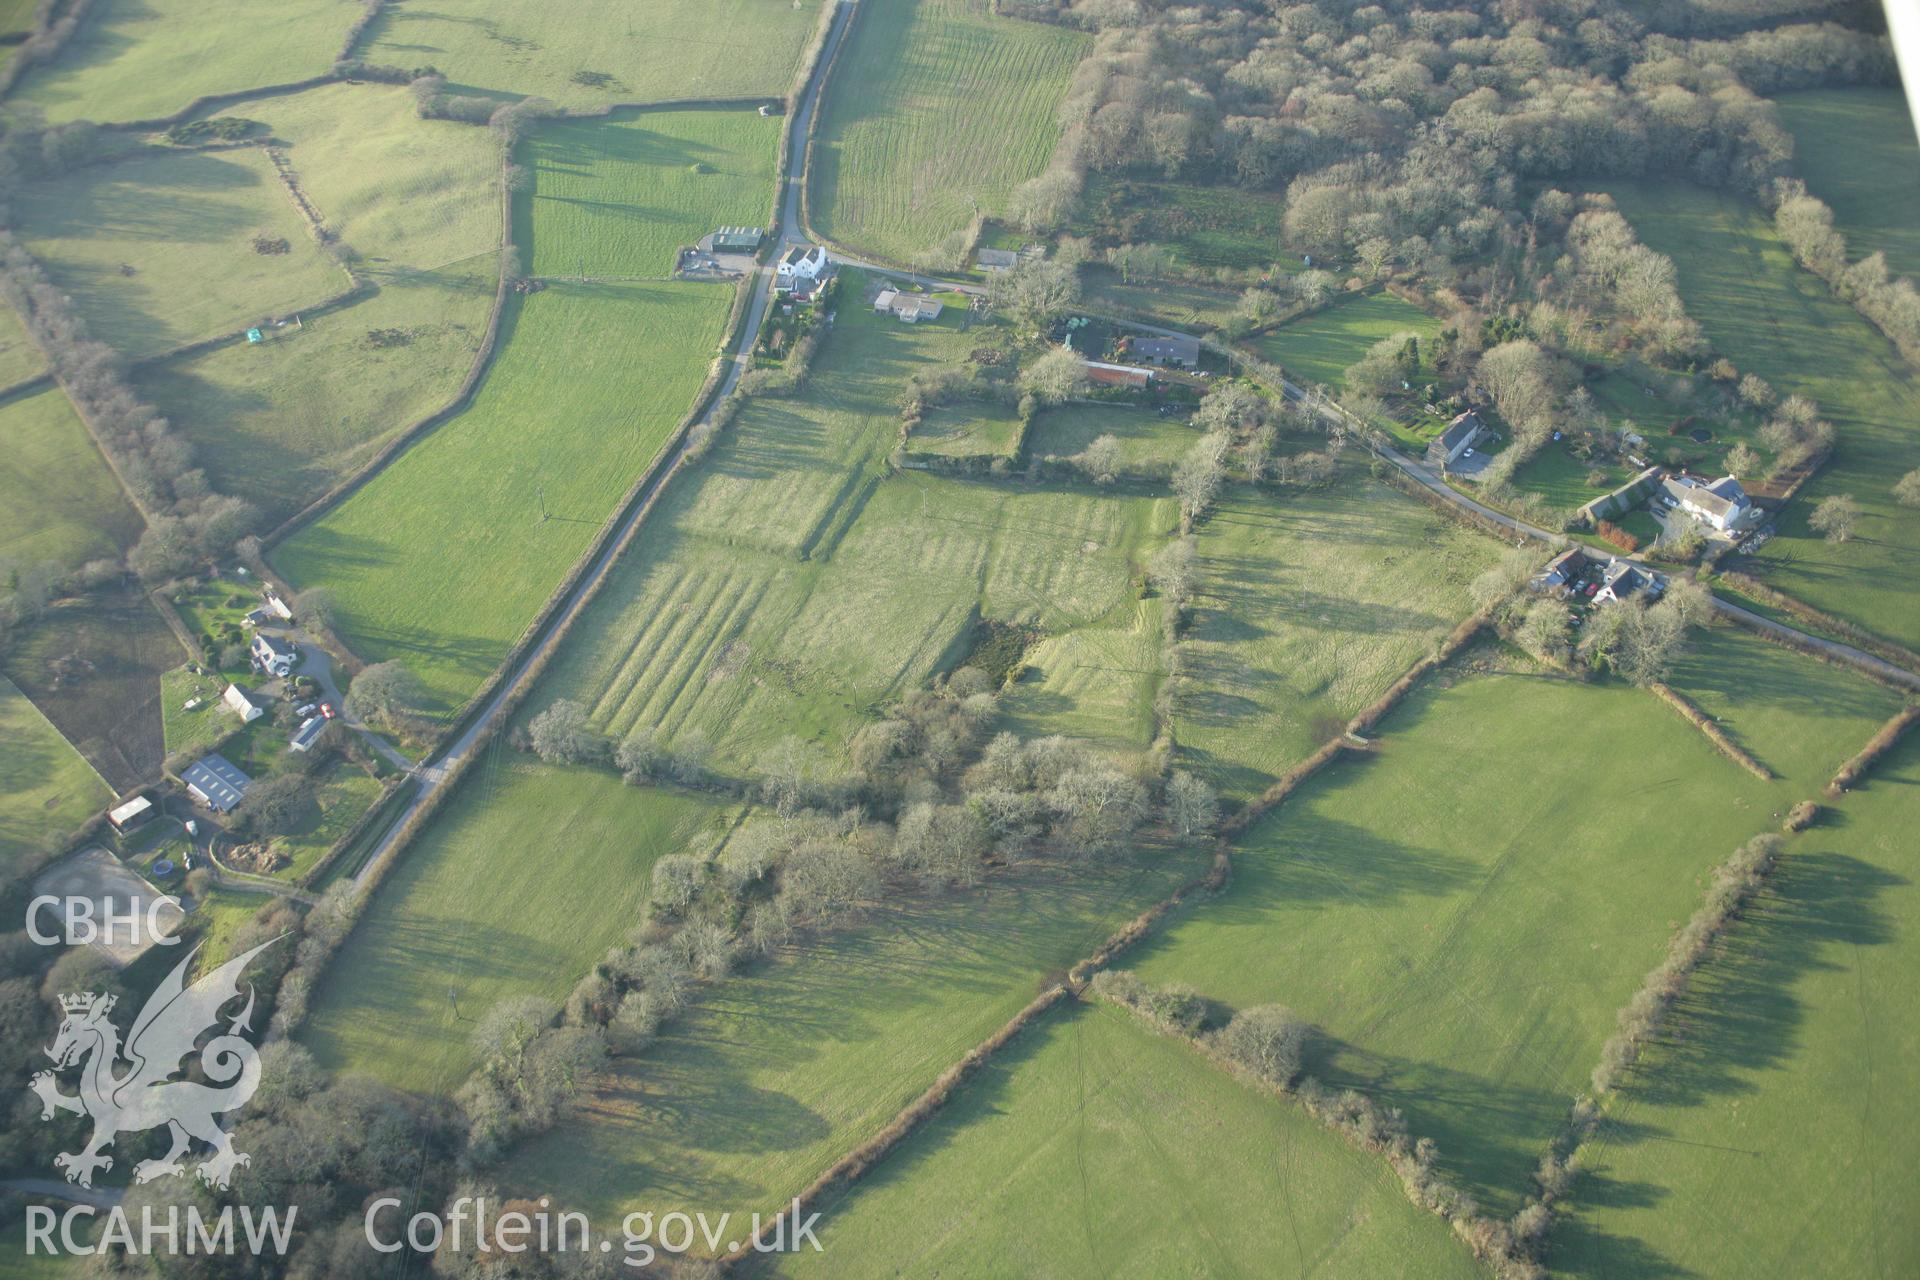 RCAHMW colour oblique aerial photograph of Landshipping House Garden Earthworks, viewed from the south-east. Taken on 26 January 2006 by Toby Driver.